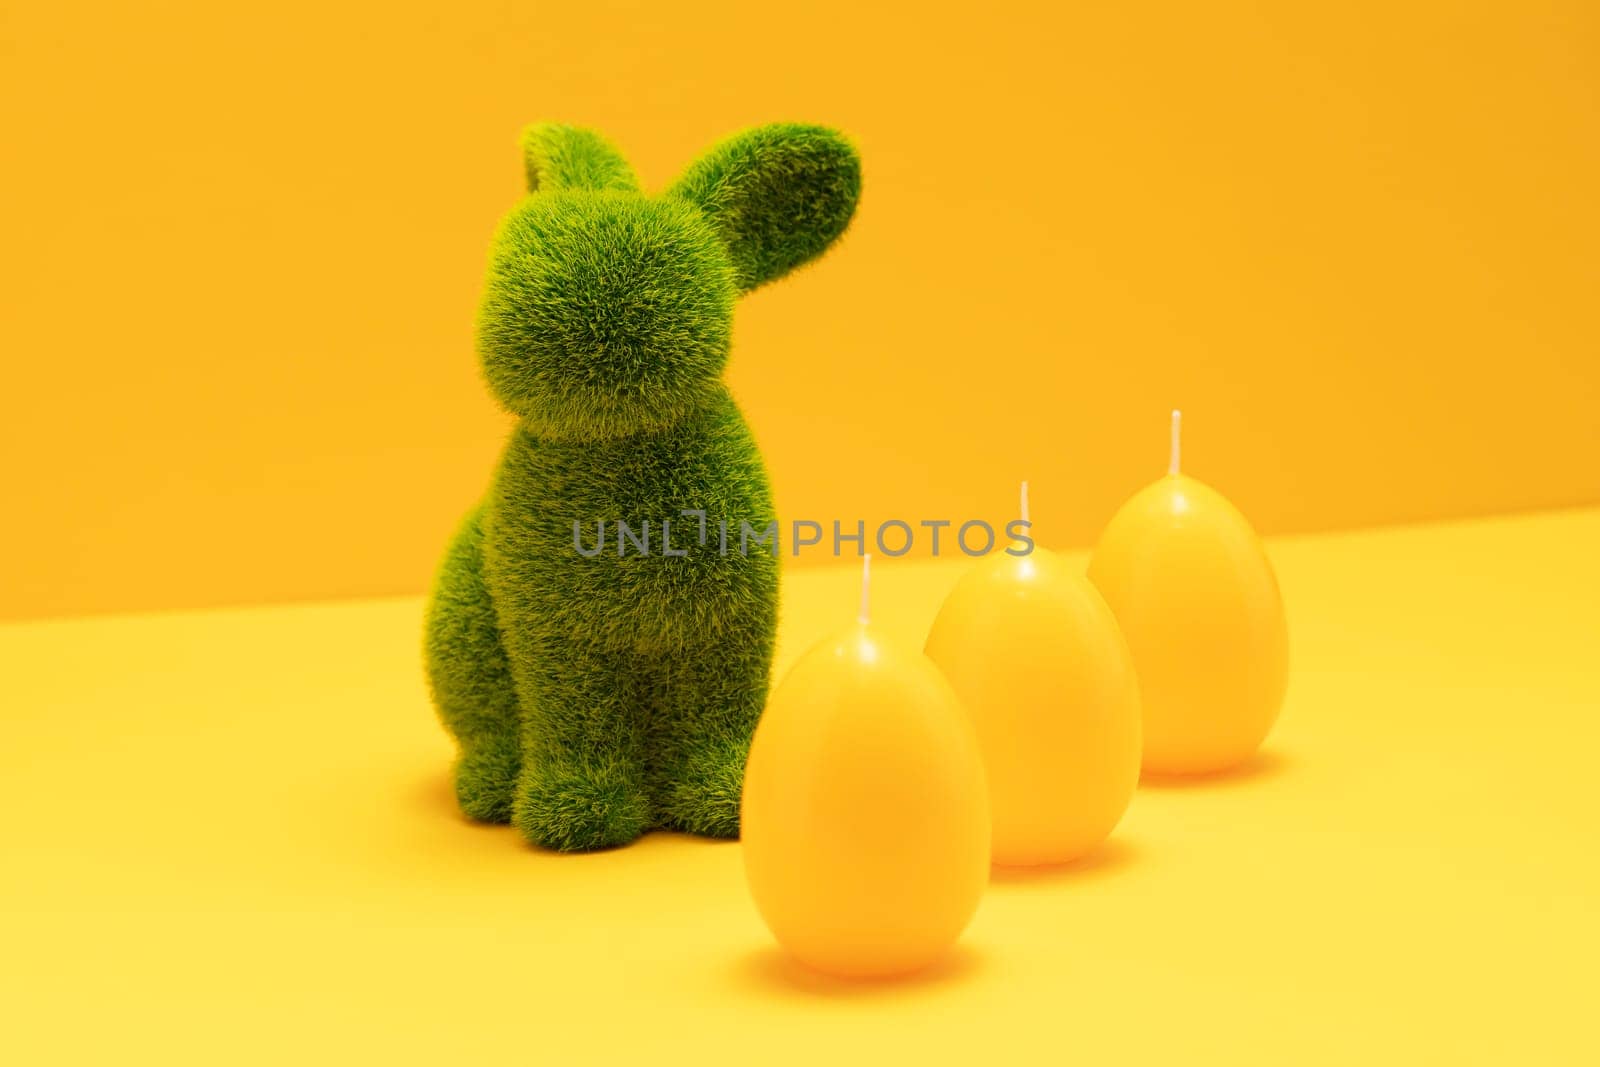 Green Easter Bunny with three yellow candles of eggs shape on matching monochrome orange background. Minimal Happy Easter holiday concept. Creative festive Easter greeting card, copy space for text